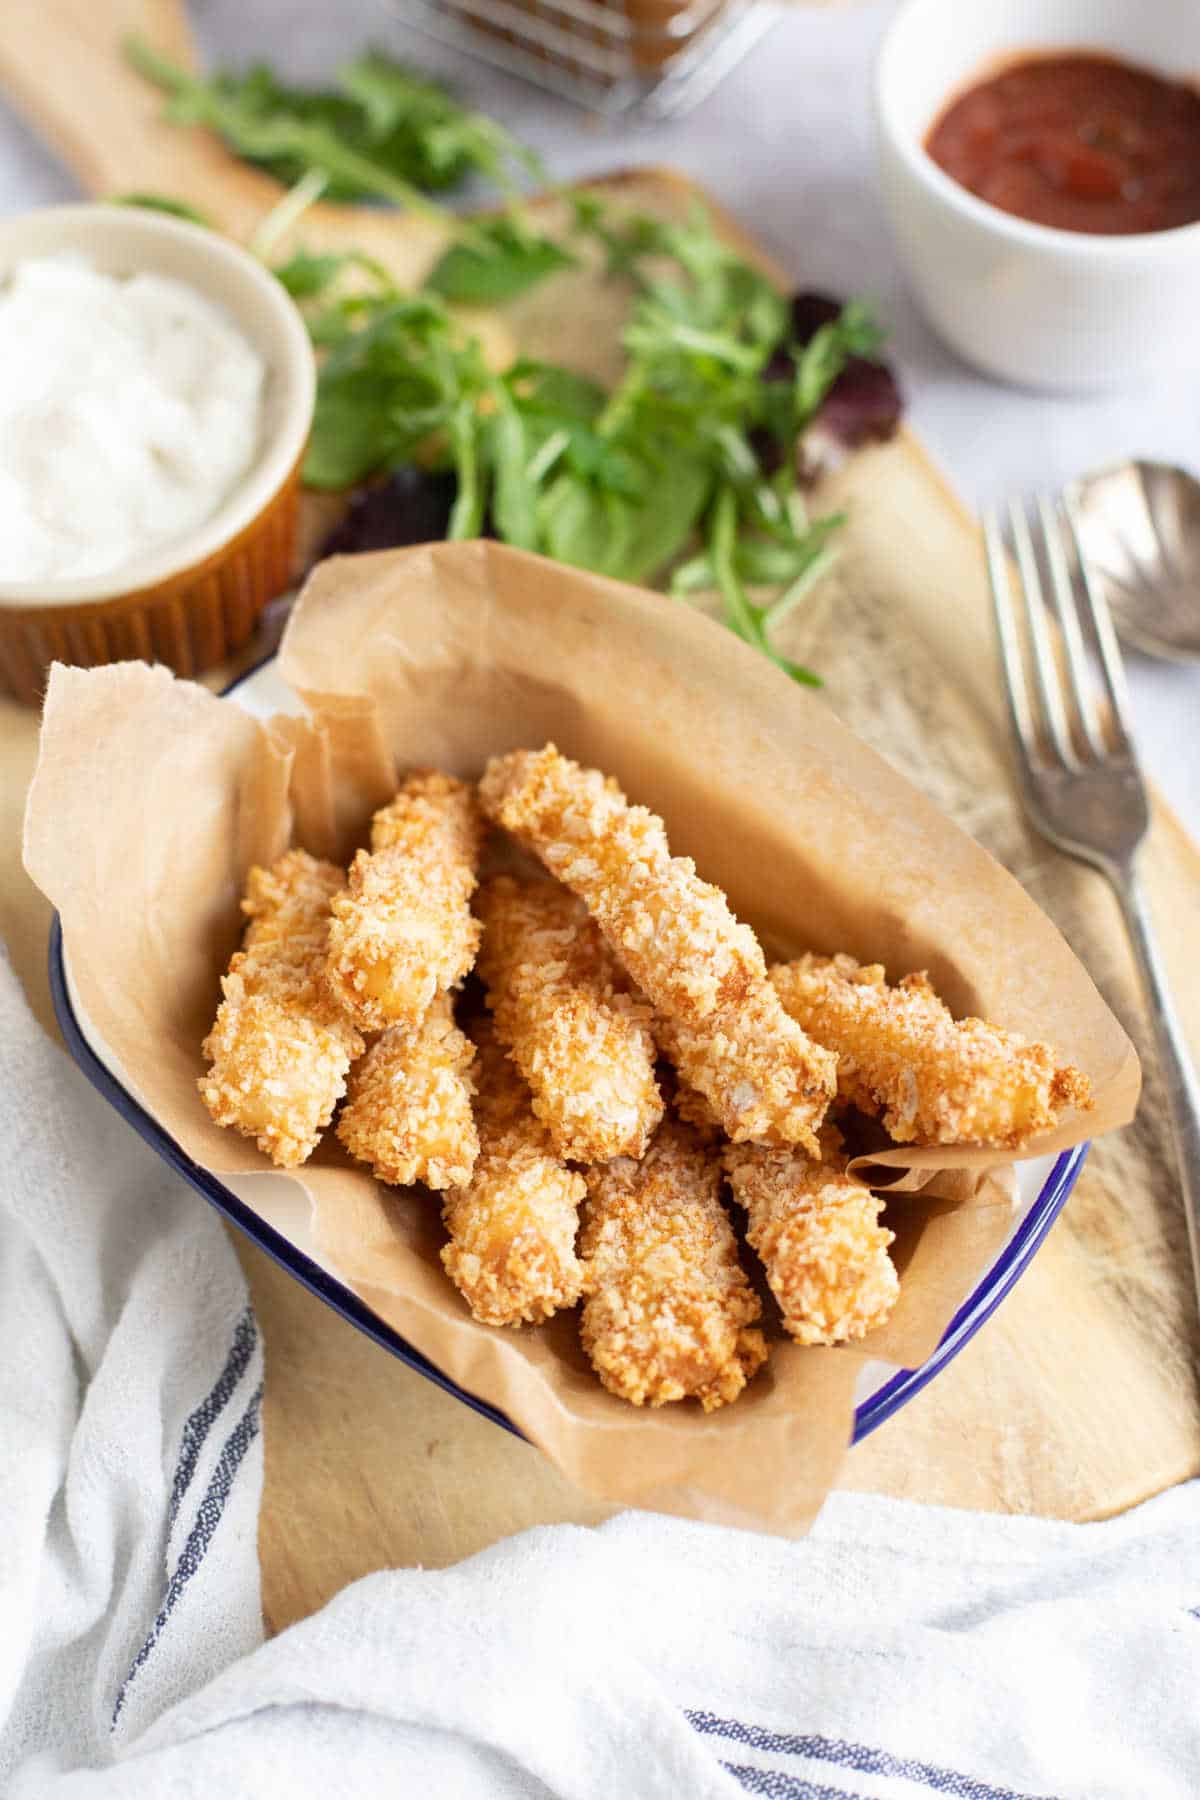 Halloumi fries in a baking dish.